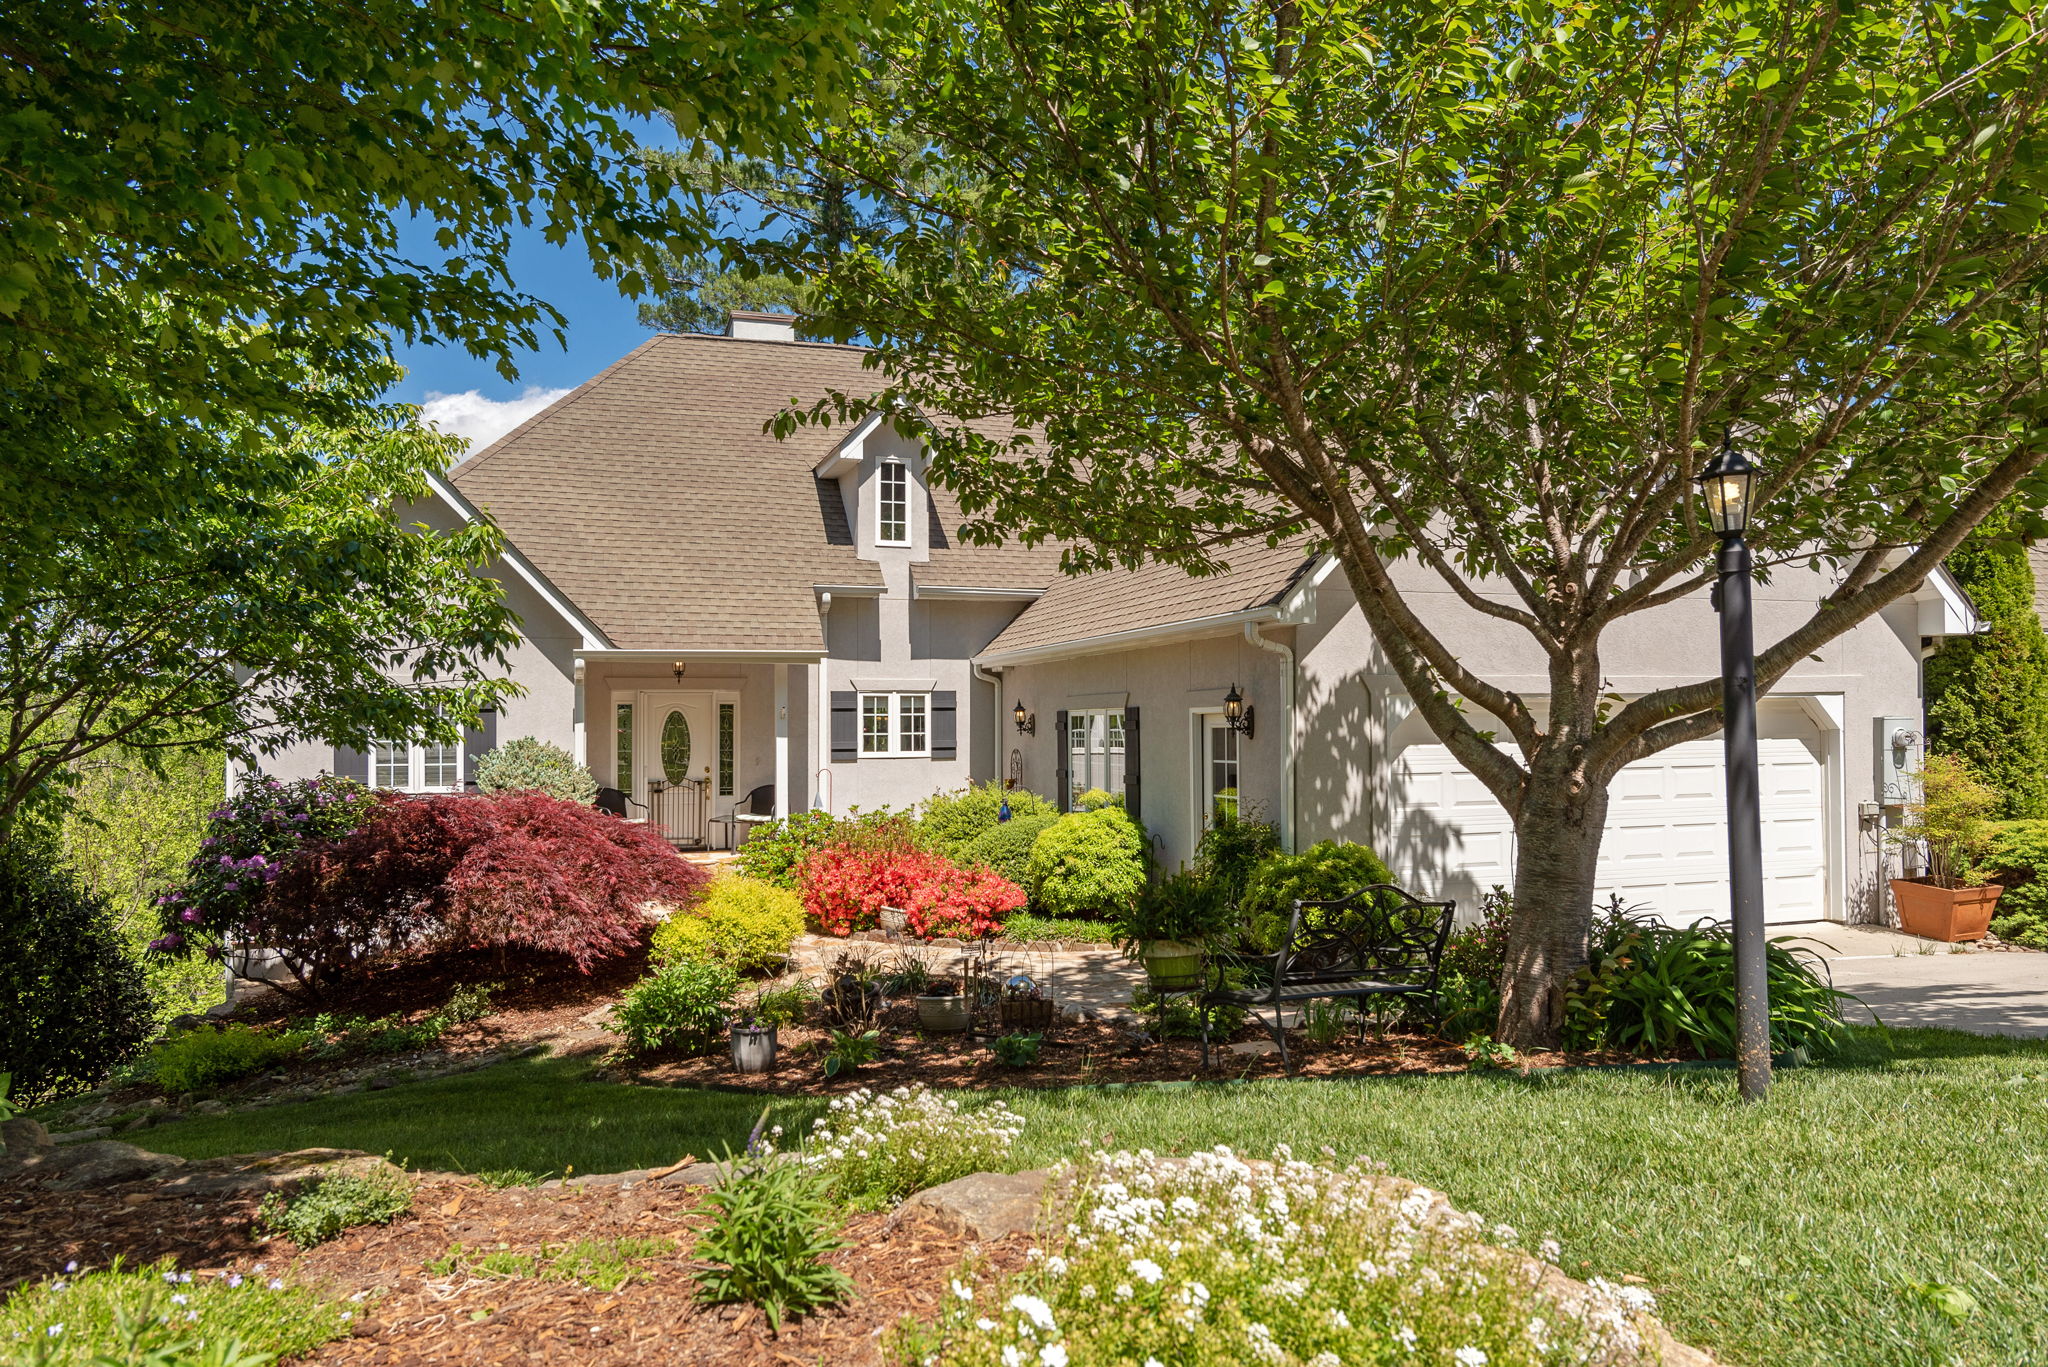  58 Carriage Spring Way, Hendersonville, NC 28791, US